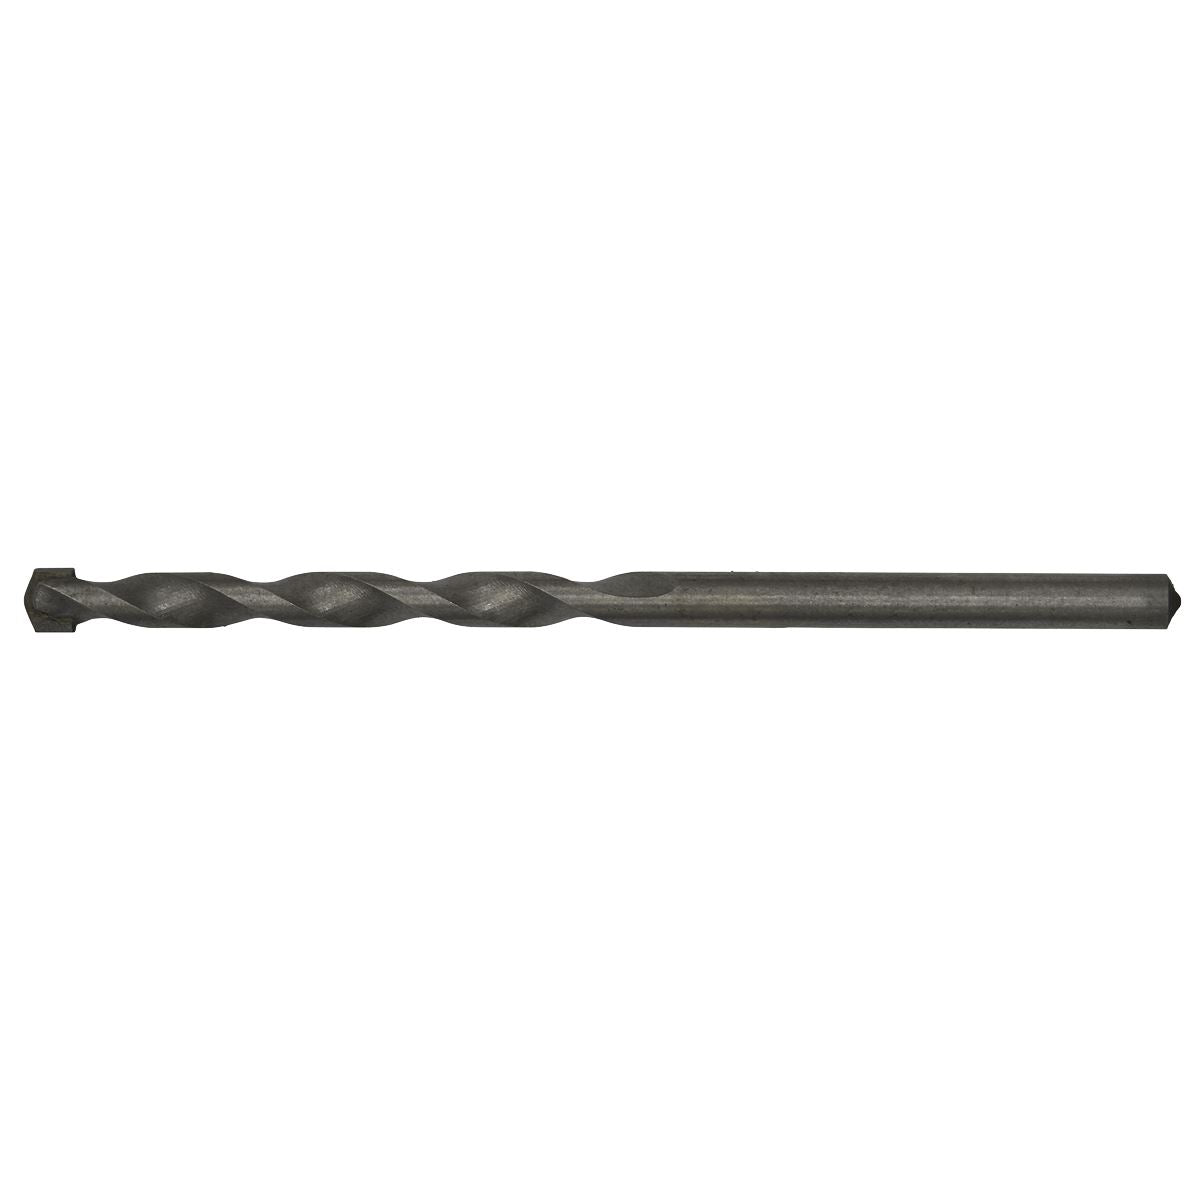 Worksafe by Sealey Straight Shank Rotary Impact Drill Bit Ø6 x 100mm